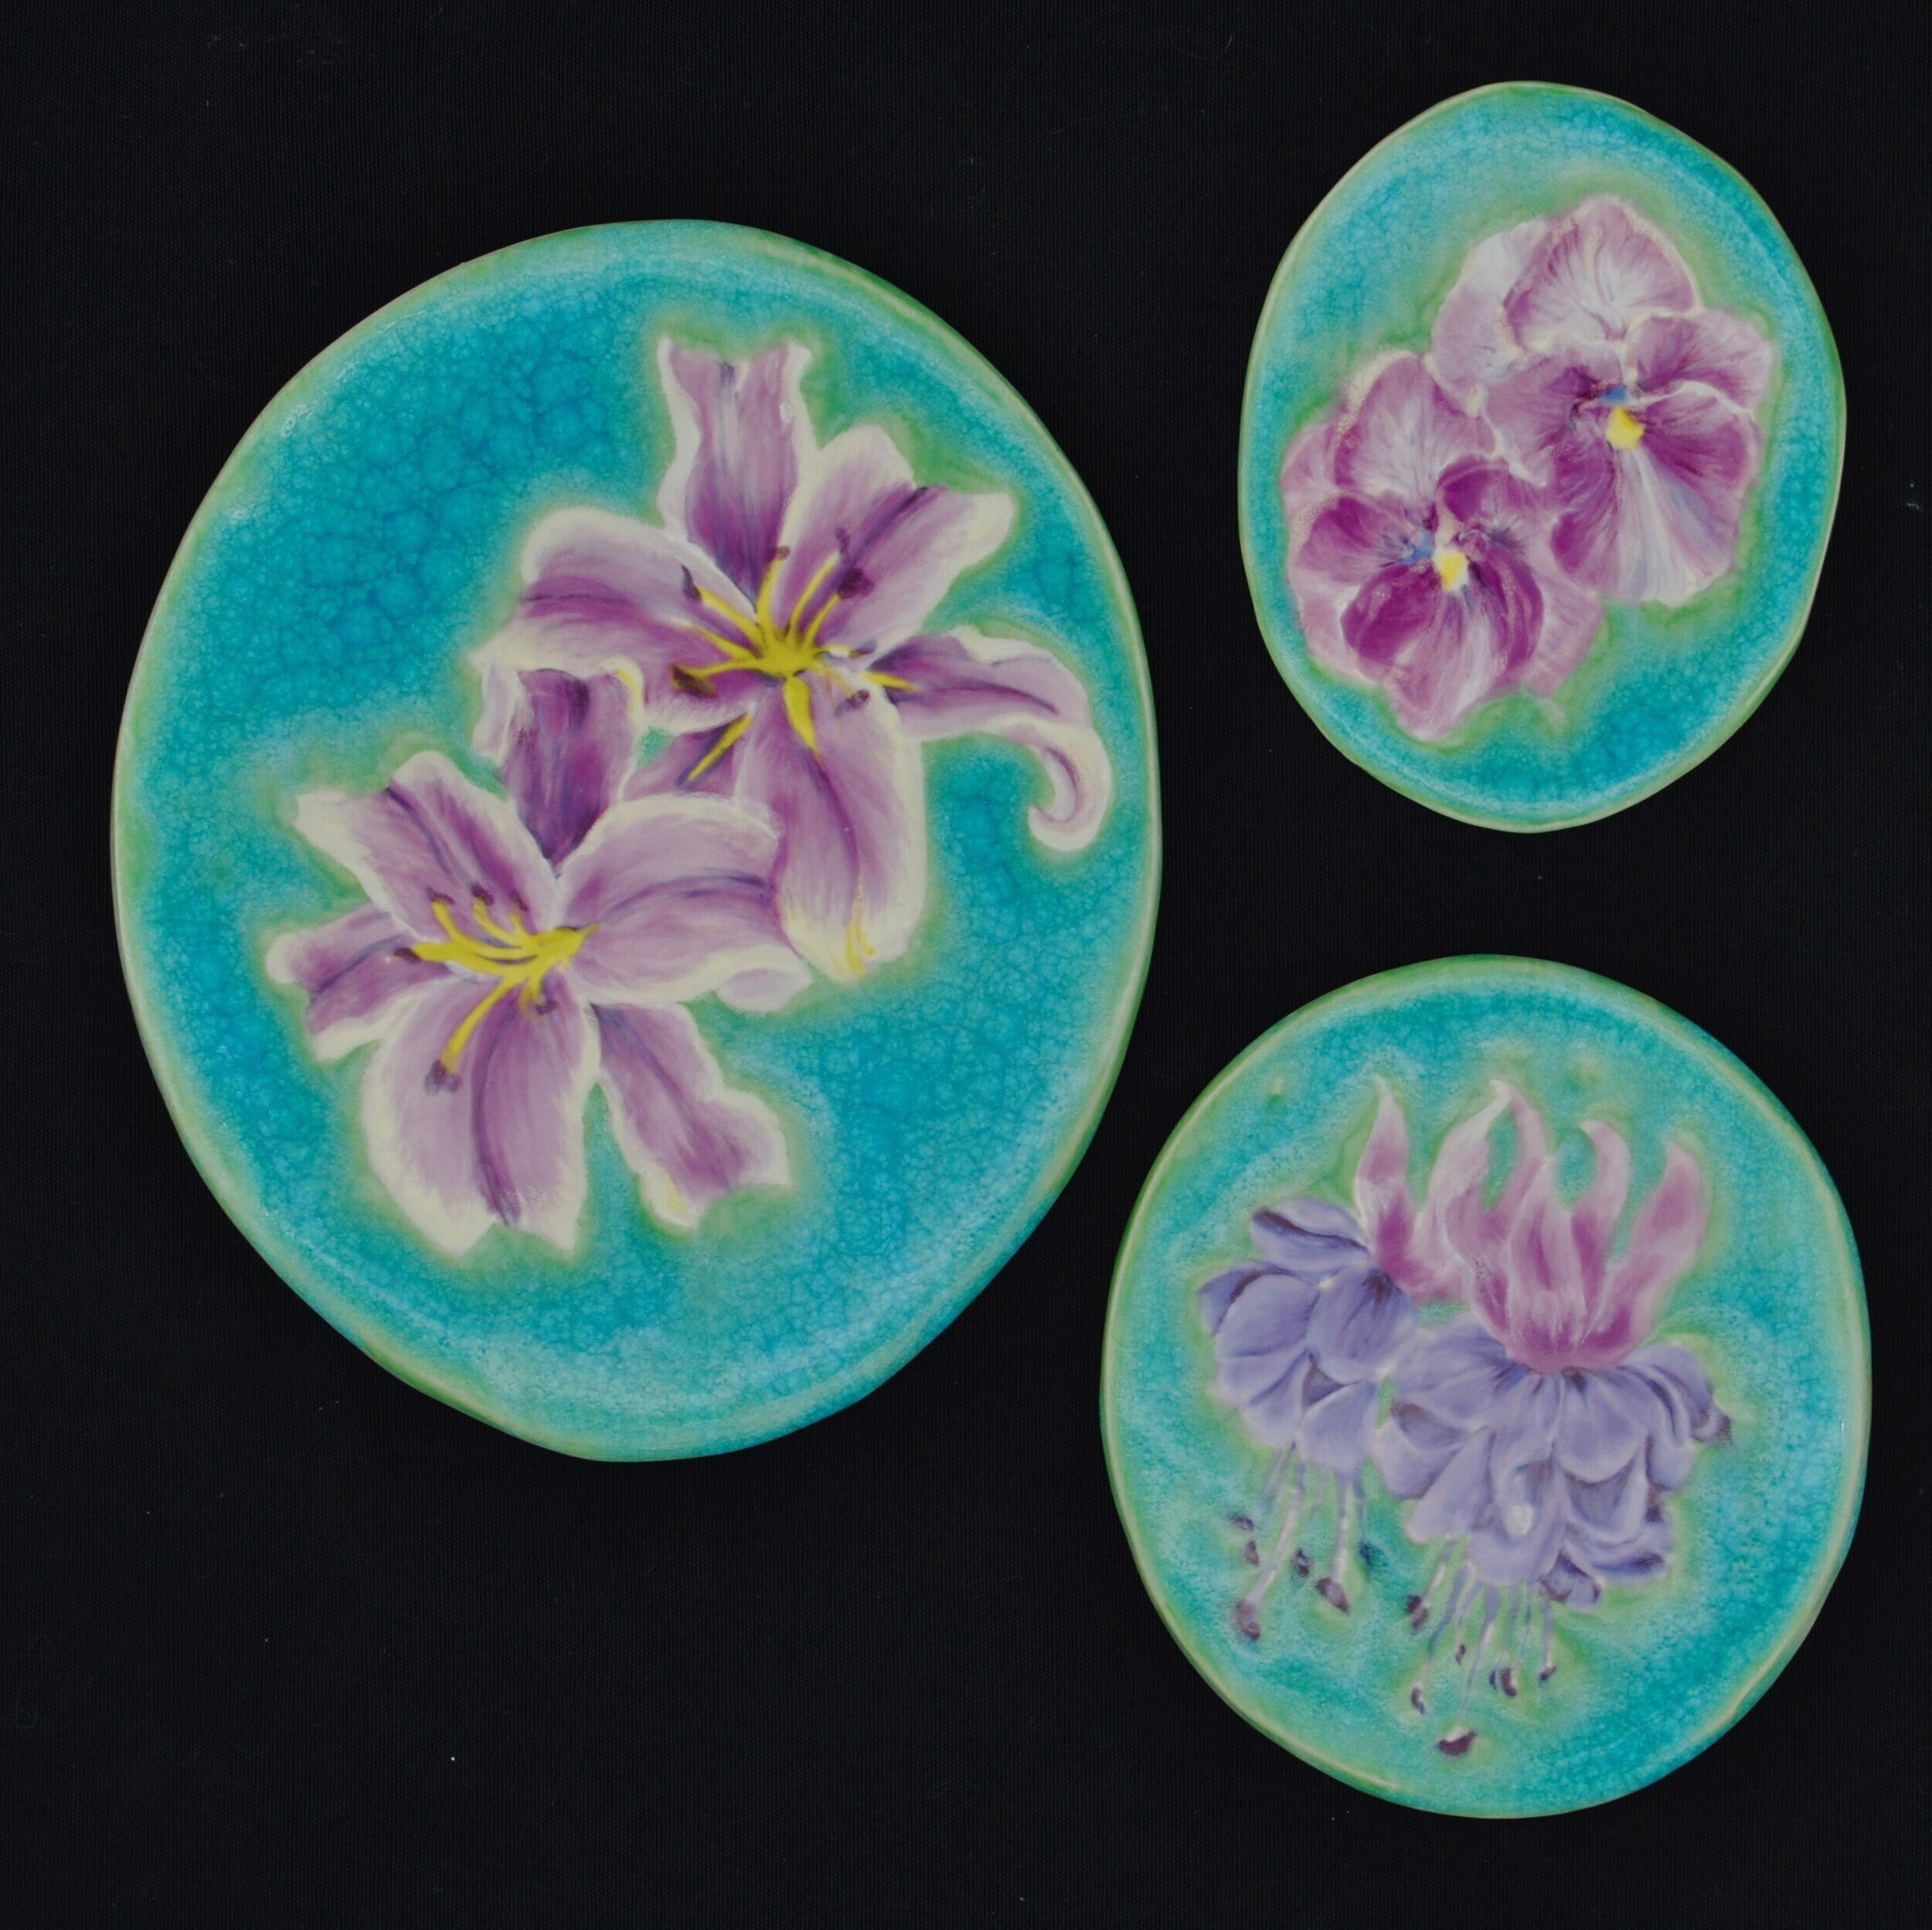  Clockwise from left:  1) Stargazer Lillies - 9” tall oval tile ($75)  2) Pansies - 5.25” tall oval tile ($25)  3) Freesias - 6.25” tall oval tile ($50) 